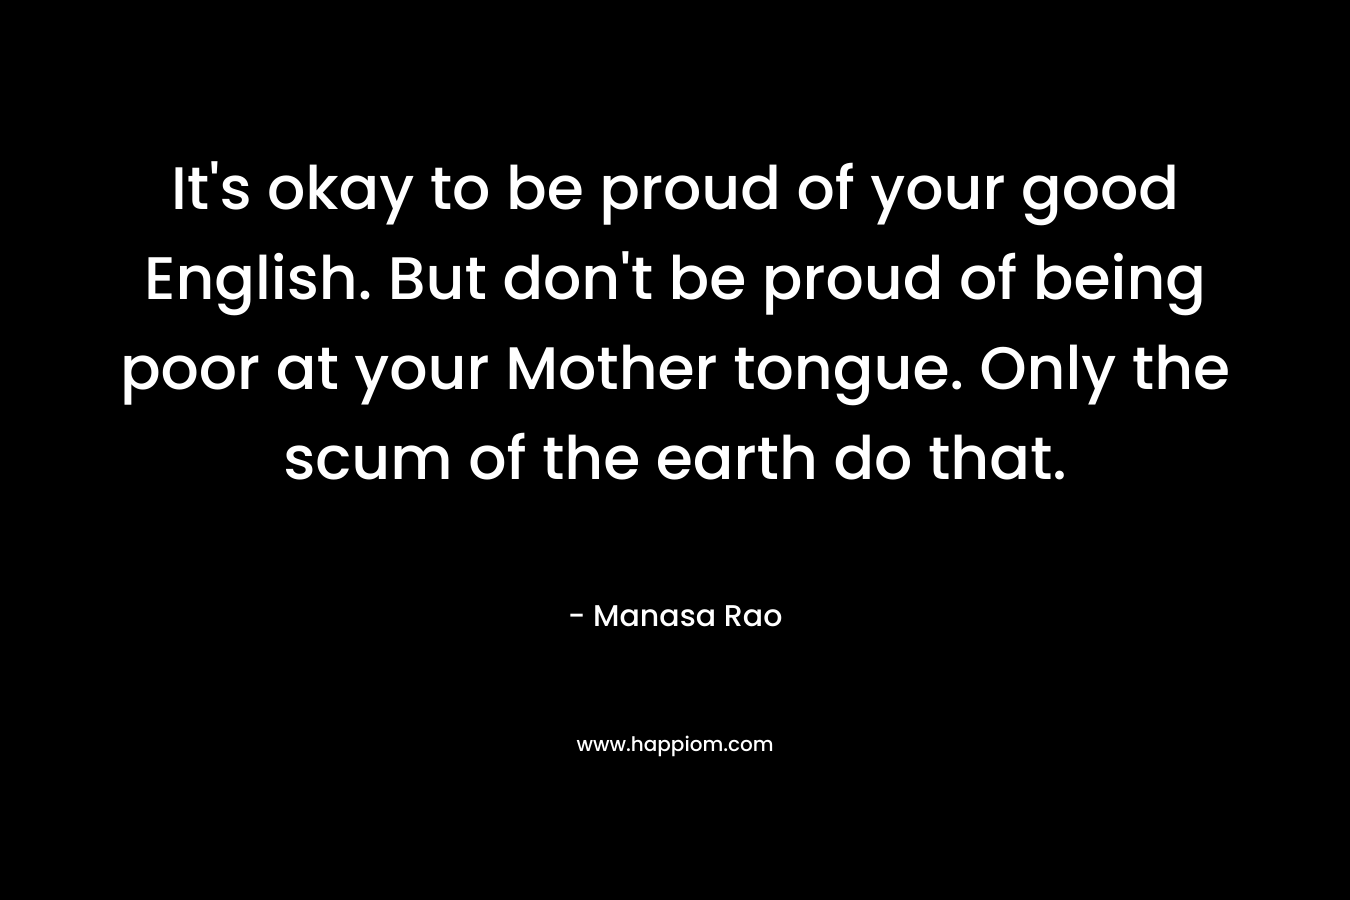 It’s okay to be proud of your good English. But don’t be proud of being poor at your Mother tongue. Only the scum of the earth do that. – Manasa Rao